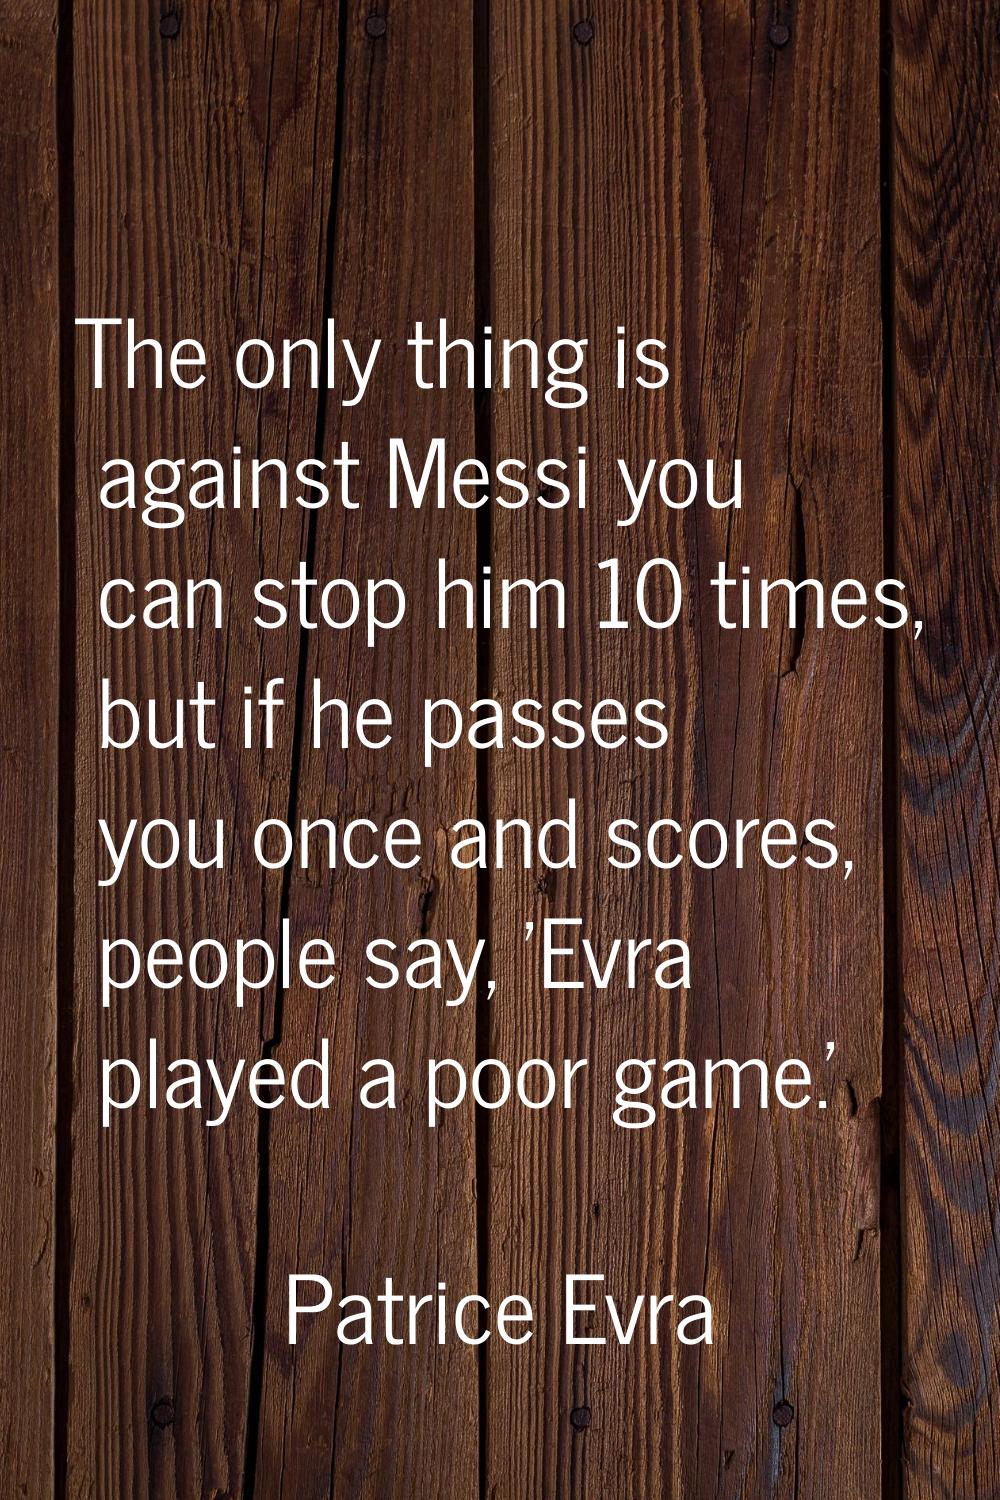 The only thing is against Messi you can stop him 10 times, but if he passes you once and scores, pe